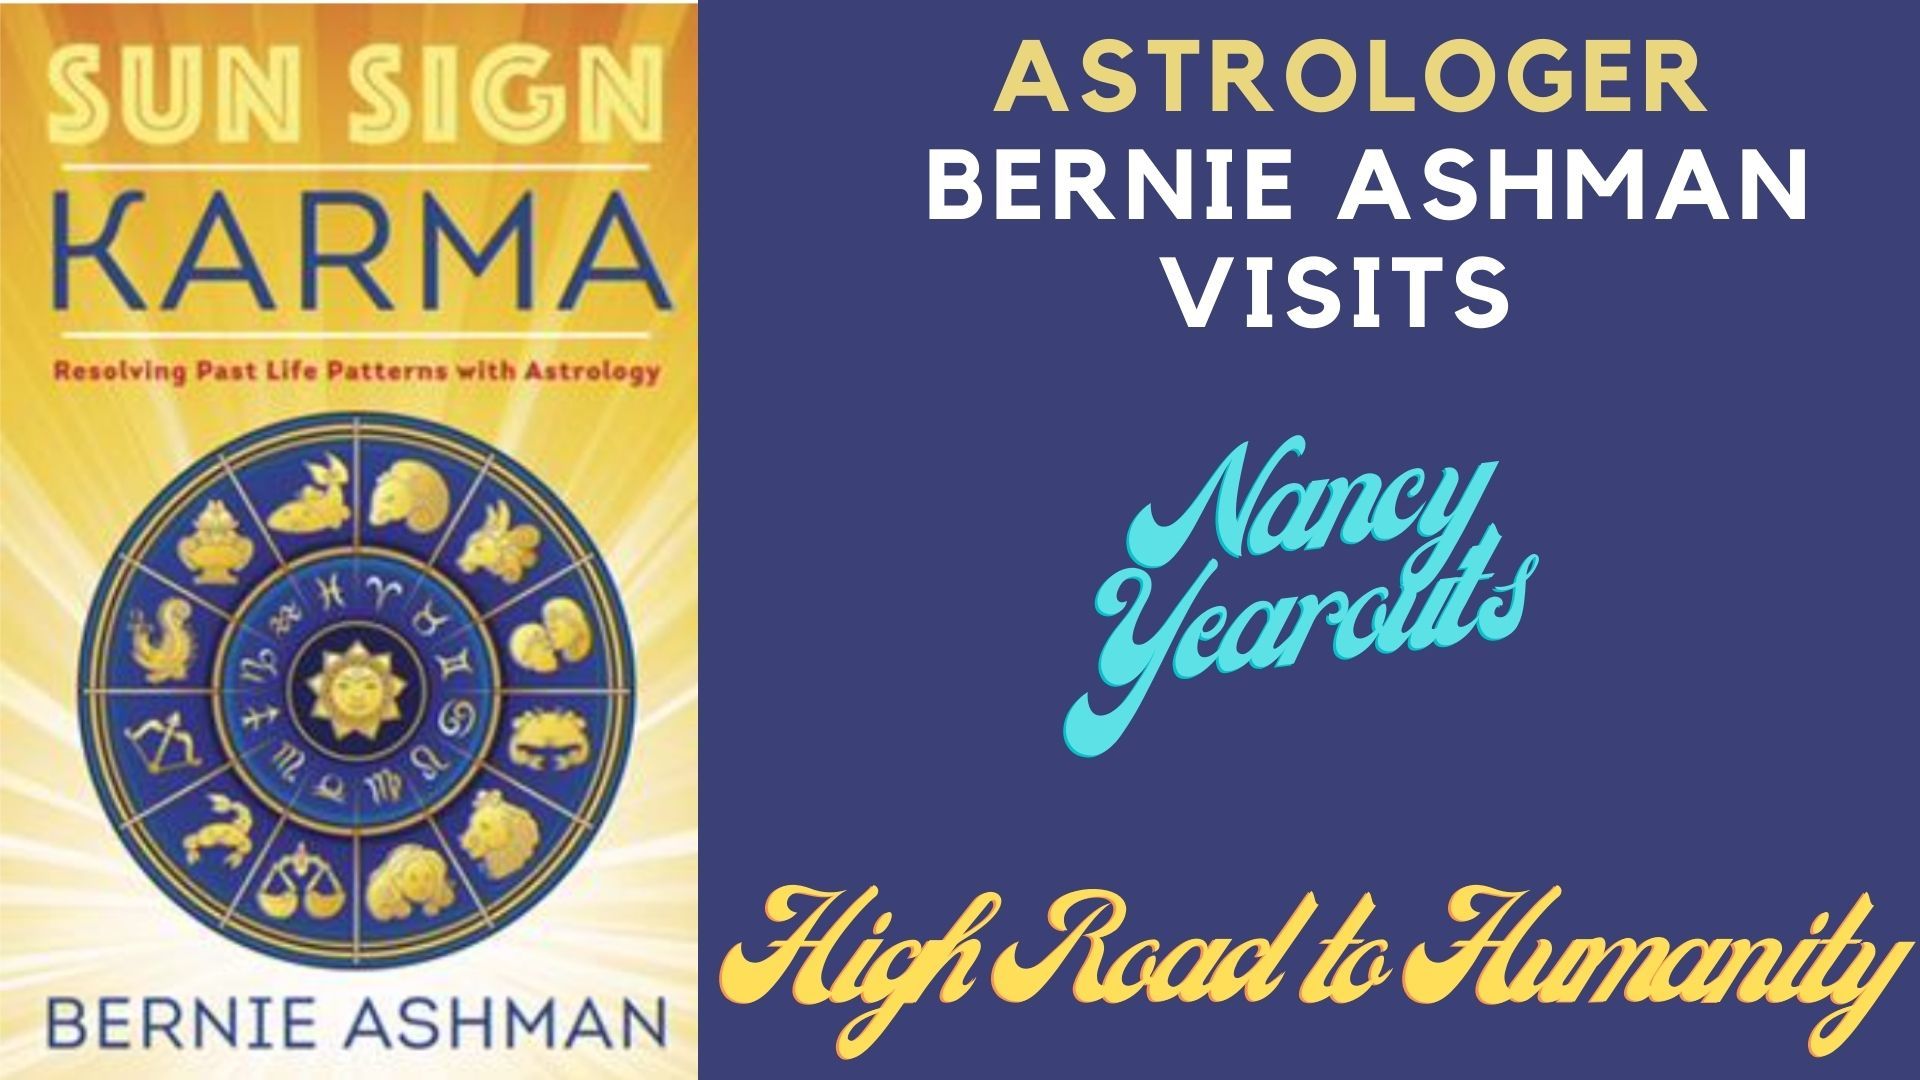 Resolve Past Life Patterns with Astrology* Sun Sign Karma with Bernie Ashman on High Road